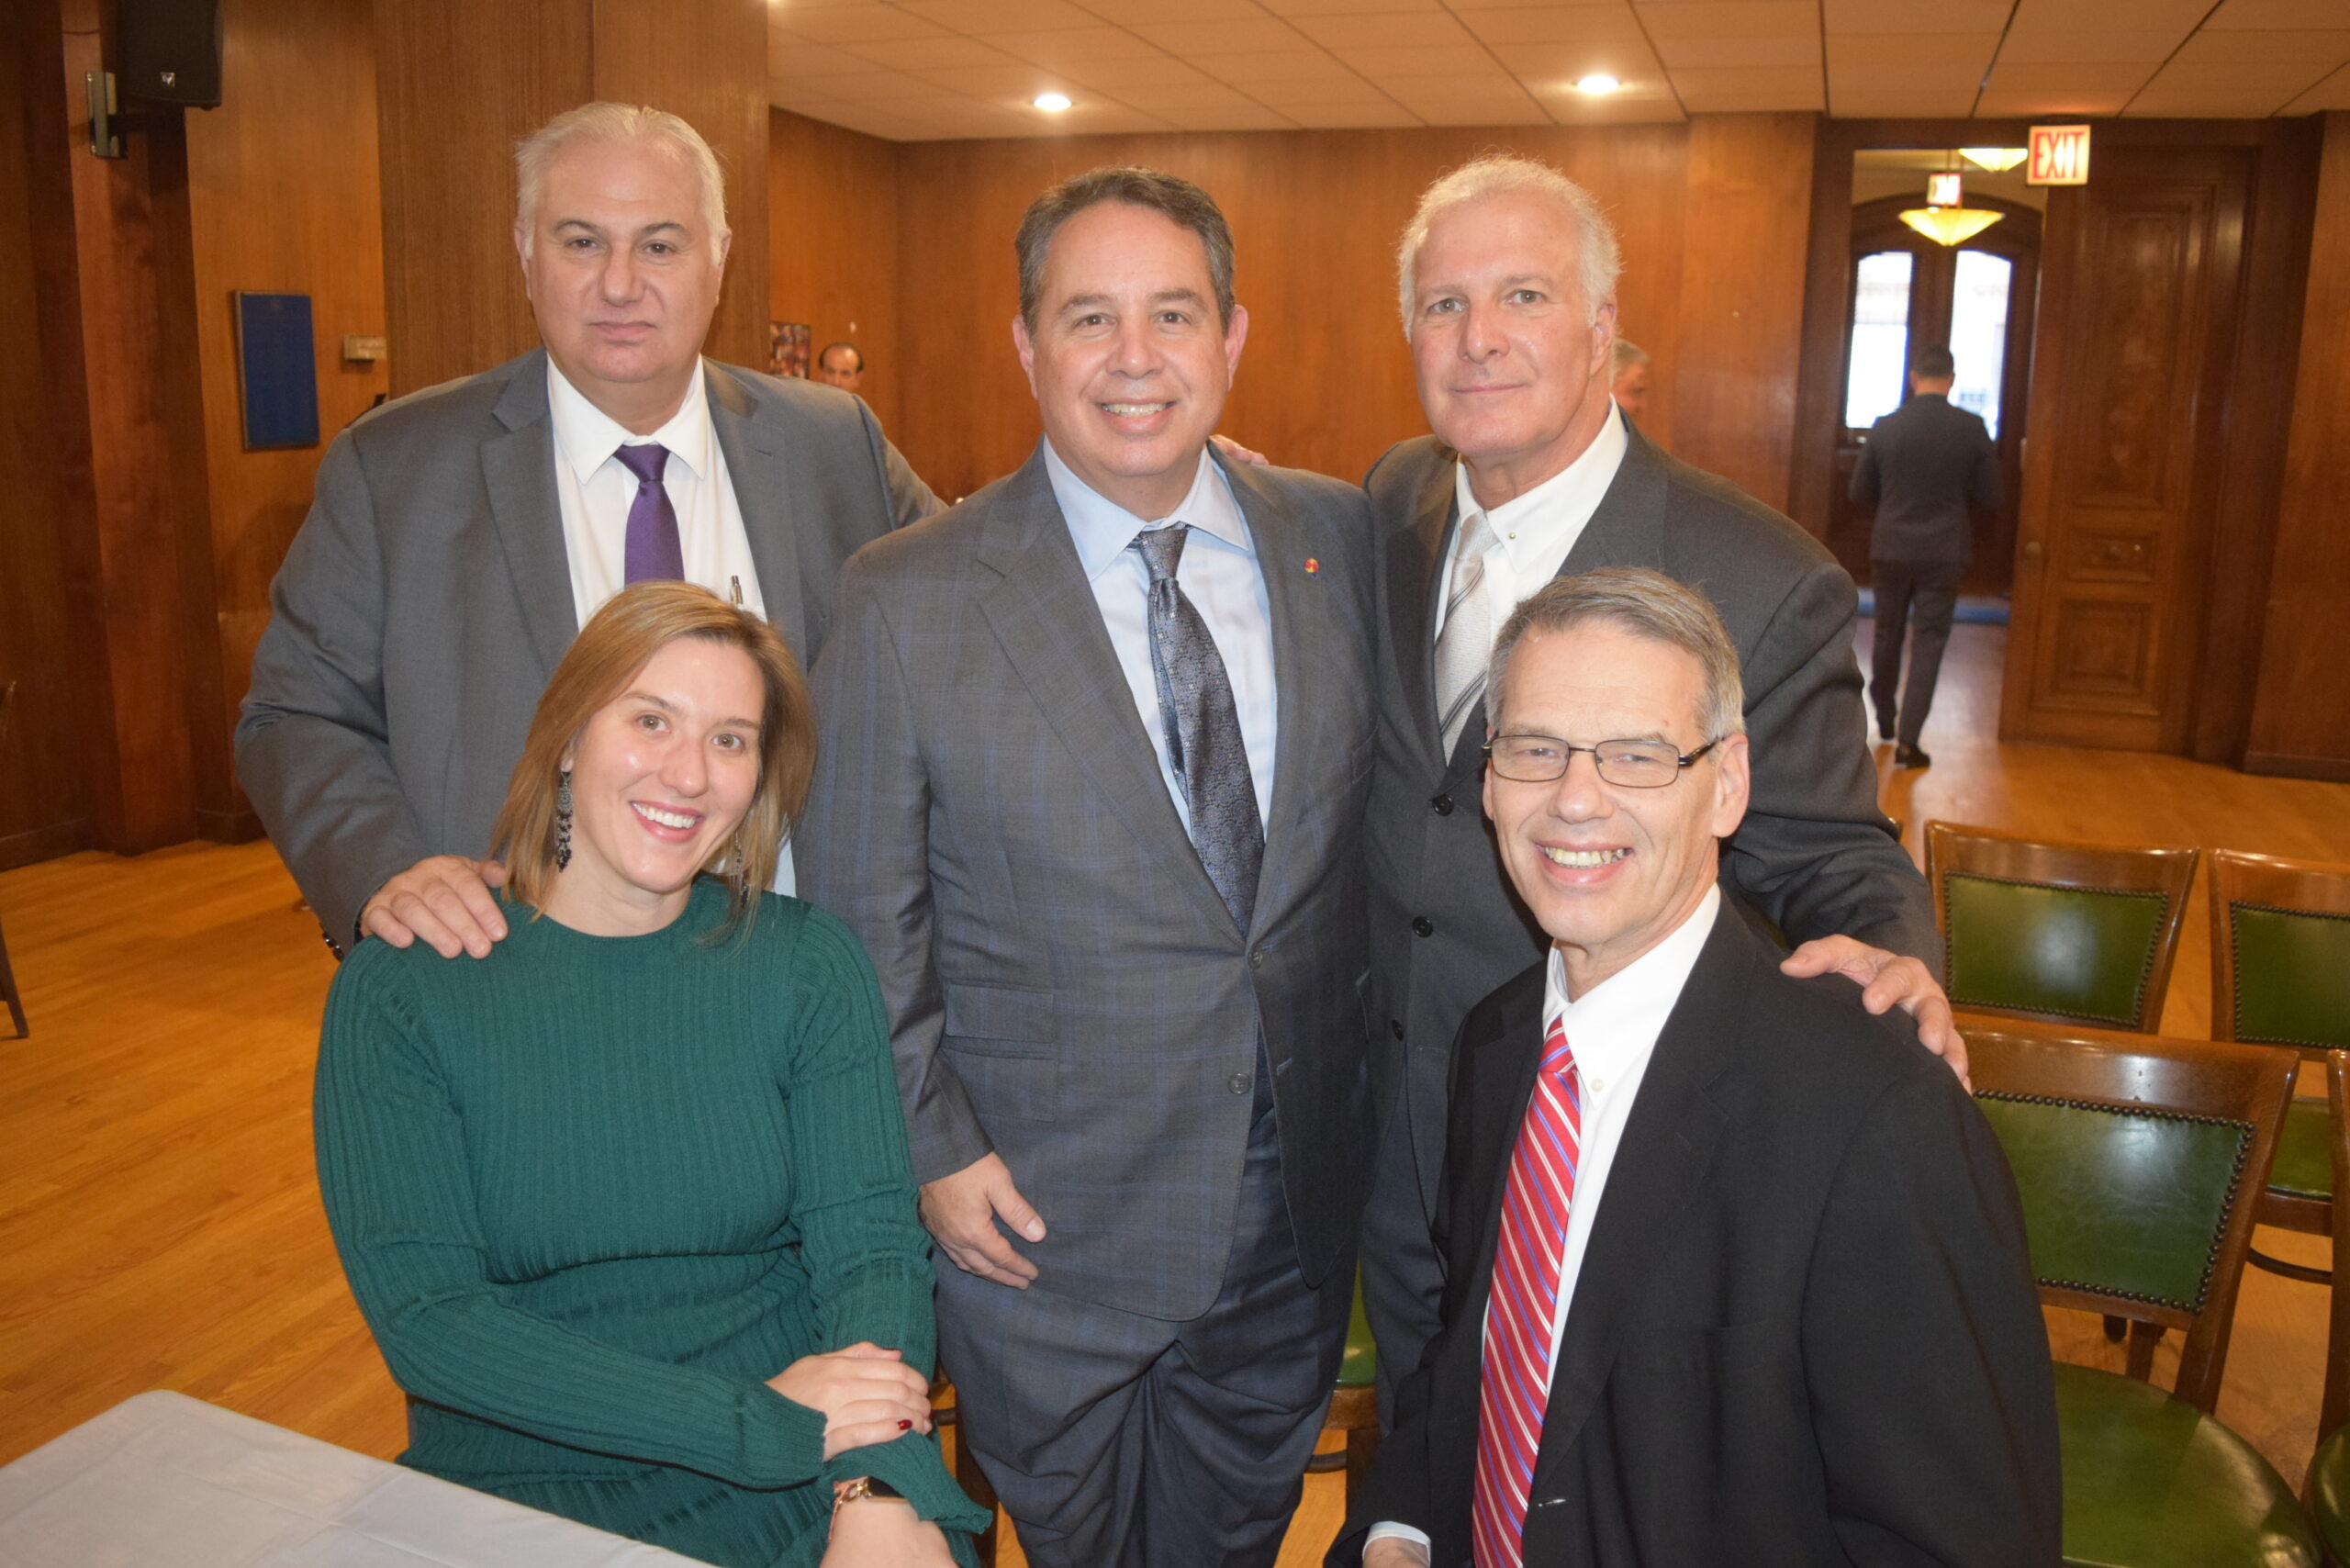 Clockwise from top left: Dean Delianites, Brooklyn Bar Association President Joseph Rosato, Gregory Cerchione, Hon. Lawrence Knipel, administrative judge of the Kings County Supreme Court, Civil Term and Alexis Riley at Catholic Lawyers Guild Advent gathering.